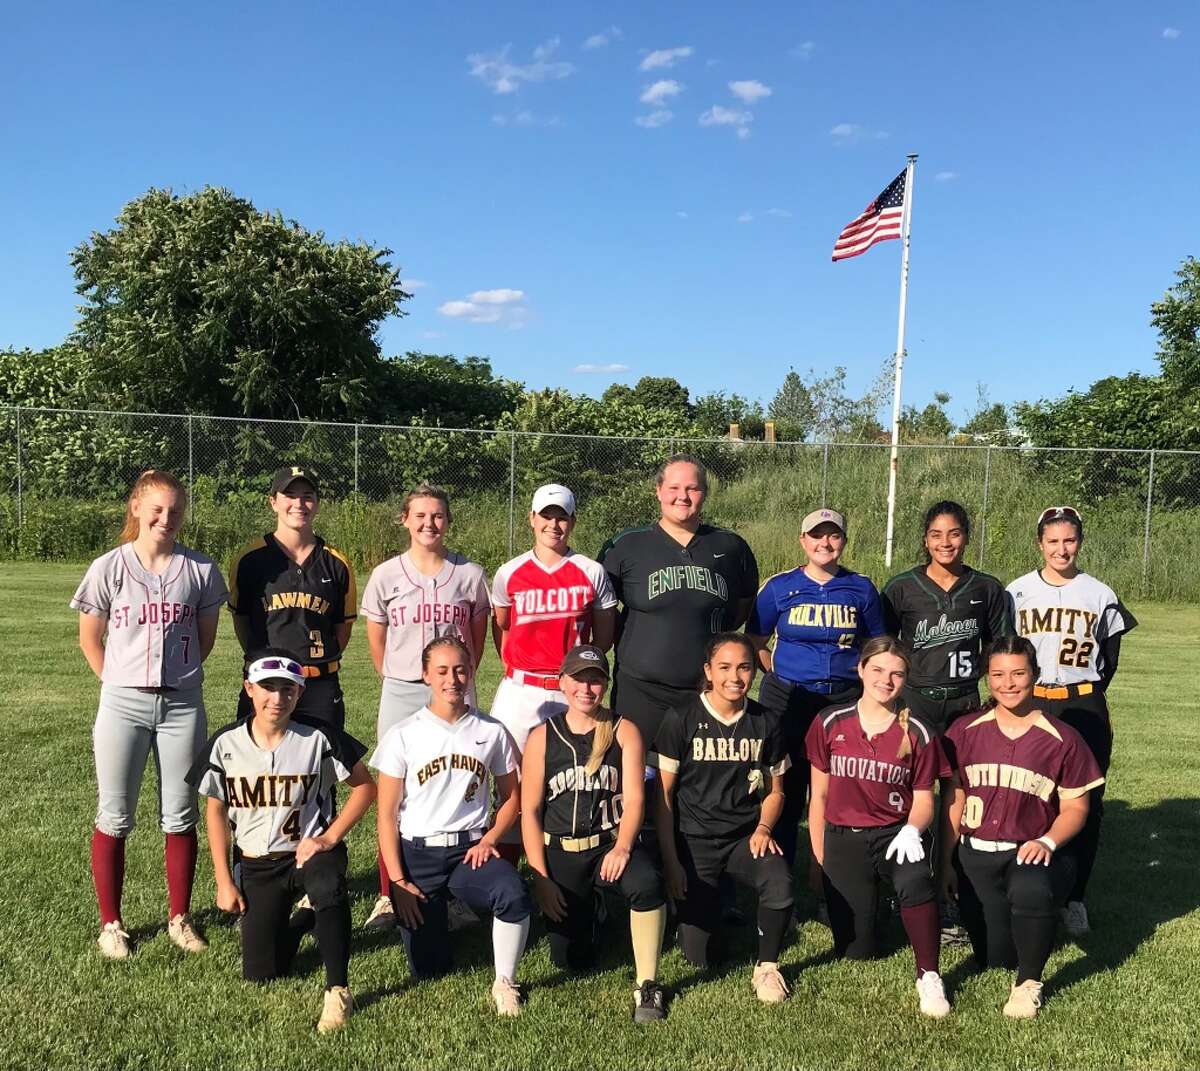 The CT High School All-Star softball team met the Stratford Brakettes for the 21st time. Team members (front row) are Juliette Zito Amity, Sammie Franceschi East Haven, May Dowes Woodland, Abby Ota Barlow, Kaylee Dobransky Academy of Sciences/Innovation and Kenadie Gonzalez South Windsor; (second row) Brittany Mairano St. Joseph, Maddie Lula Jonathan Law, Maddy Fitzgerald St. Joseph, Katie Cosmos Wolcott, Makenzie Cray Enfield, Alexandra Silver Rockville, Milycza Perez Maloney and Kelly Pritchard Amity.